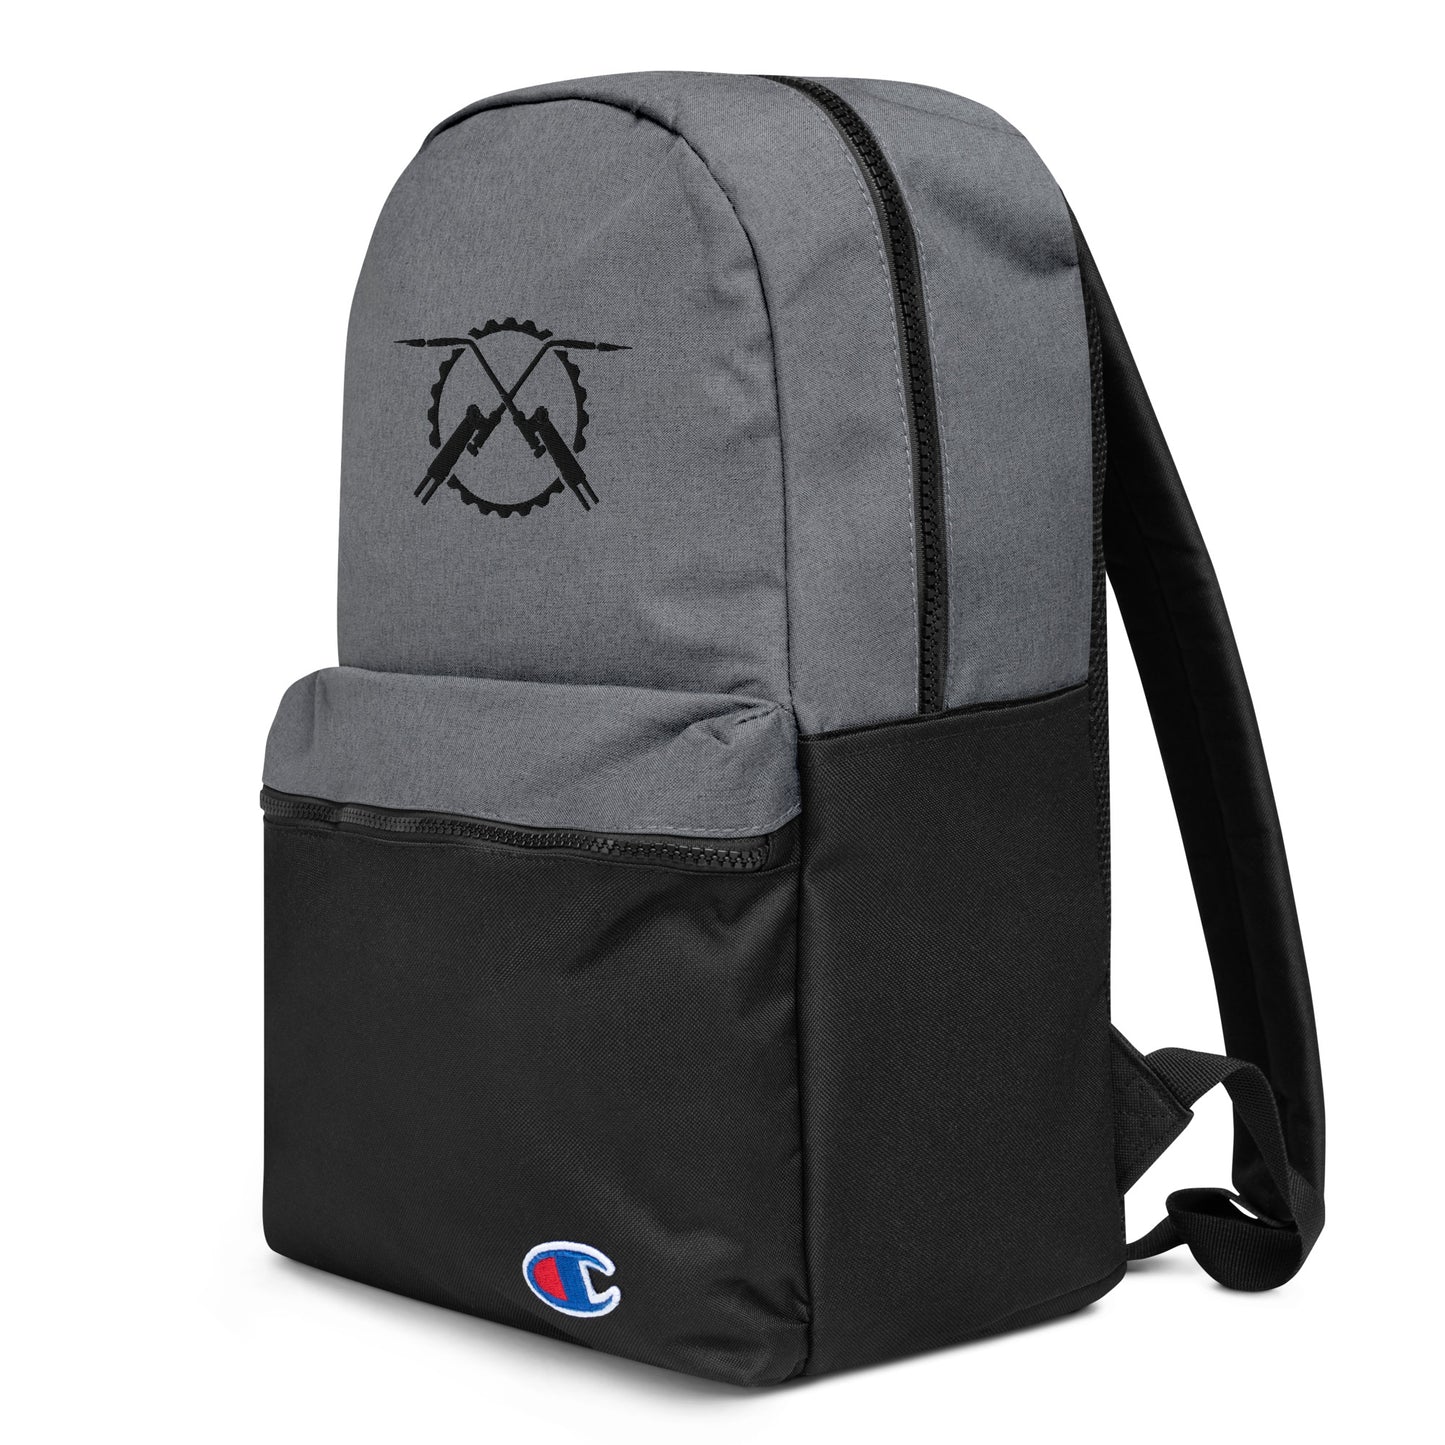 Torched Water-Resistant Backpack